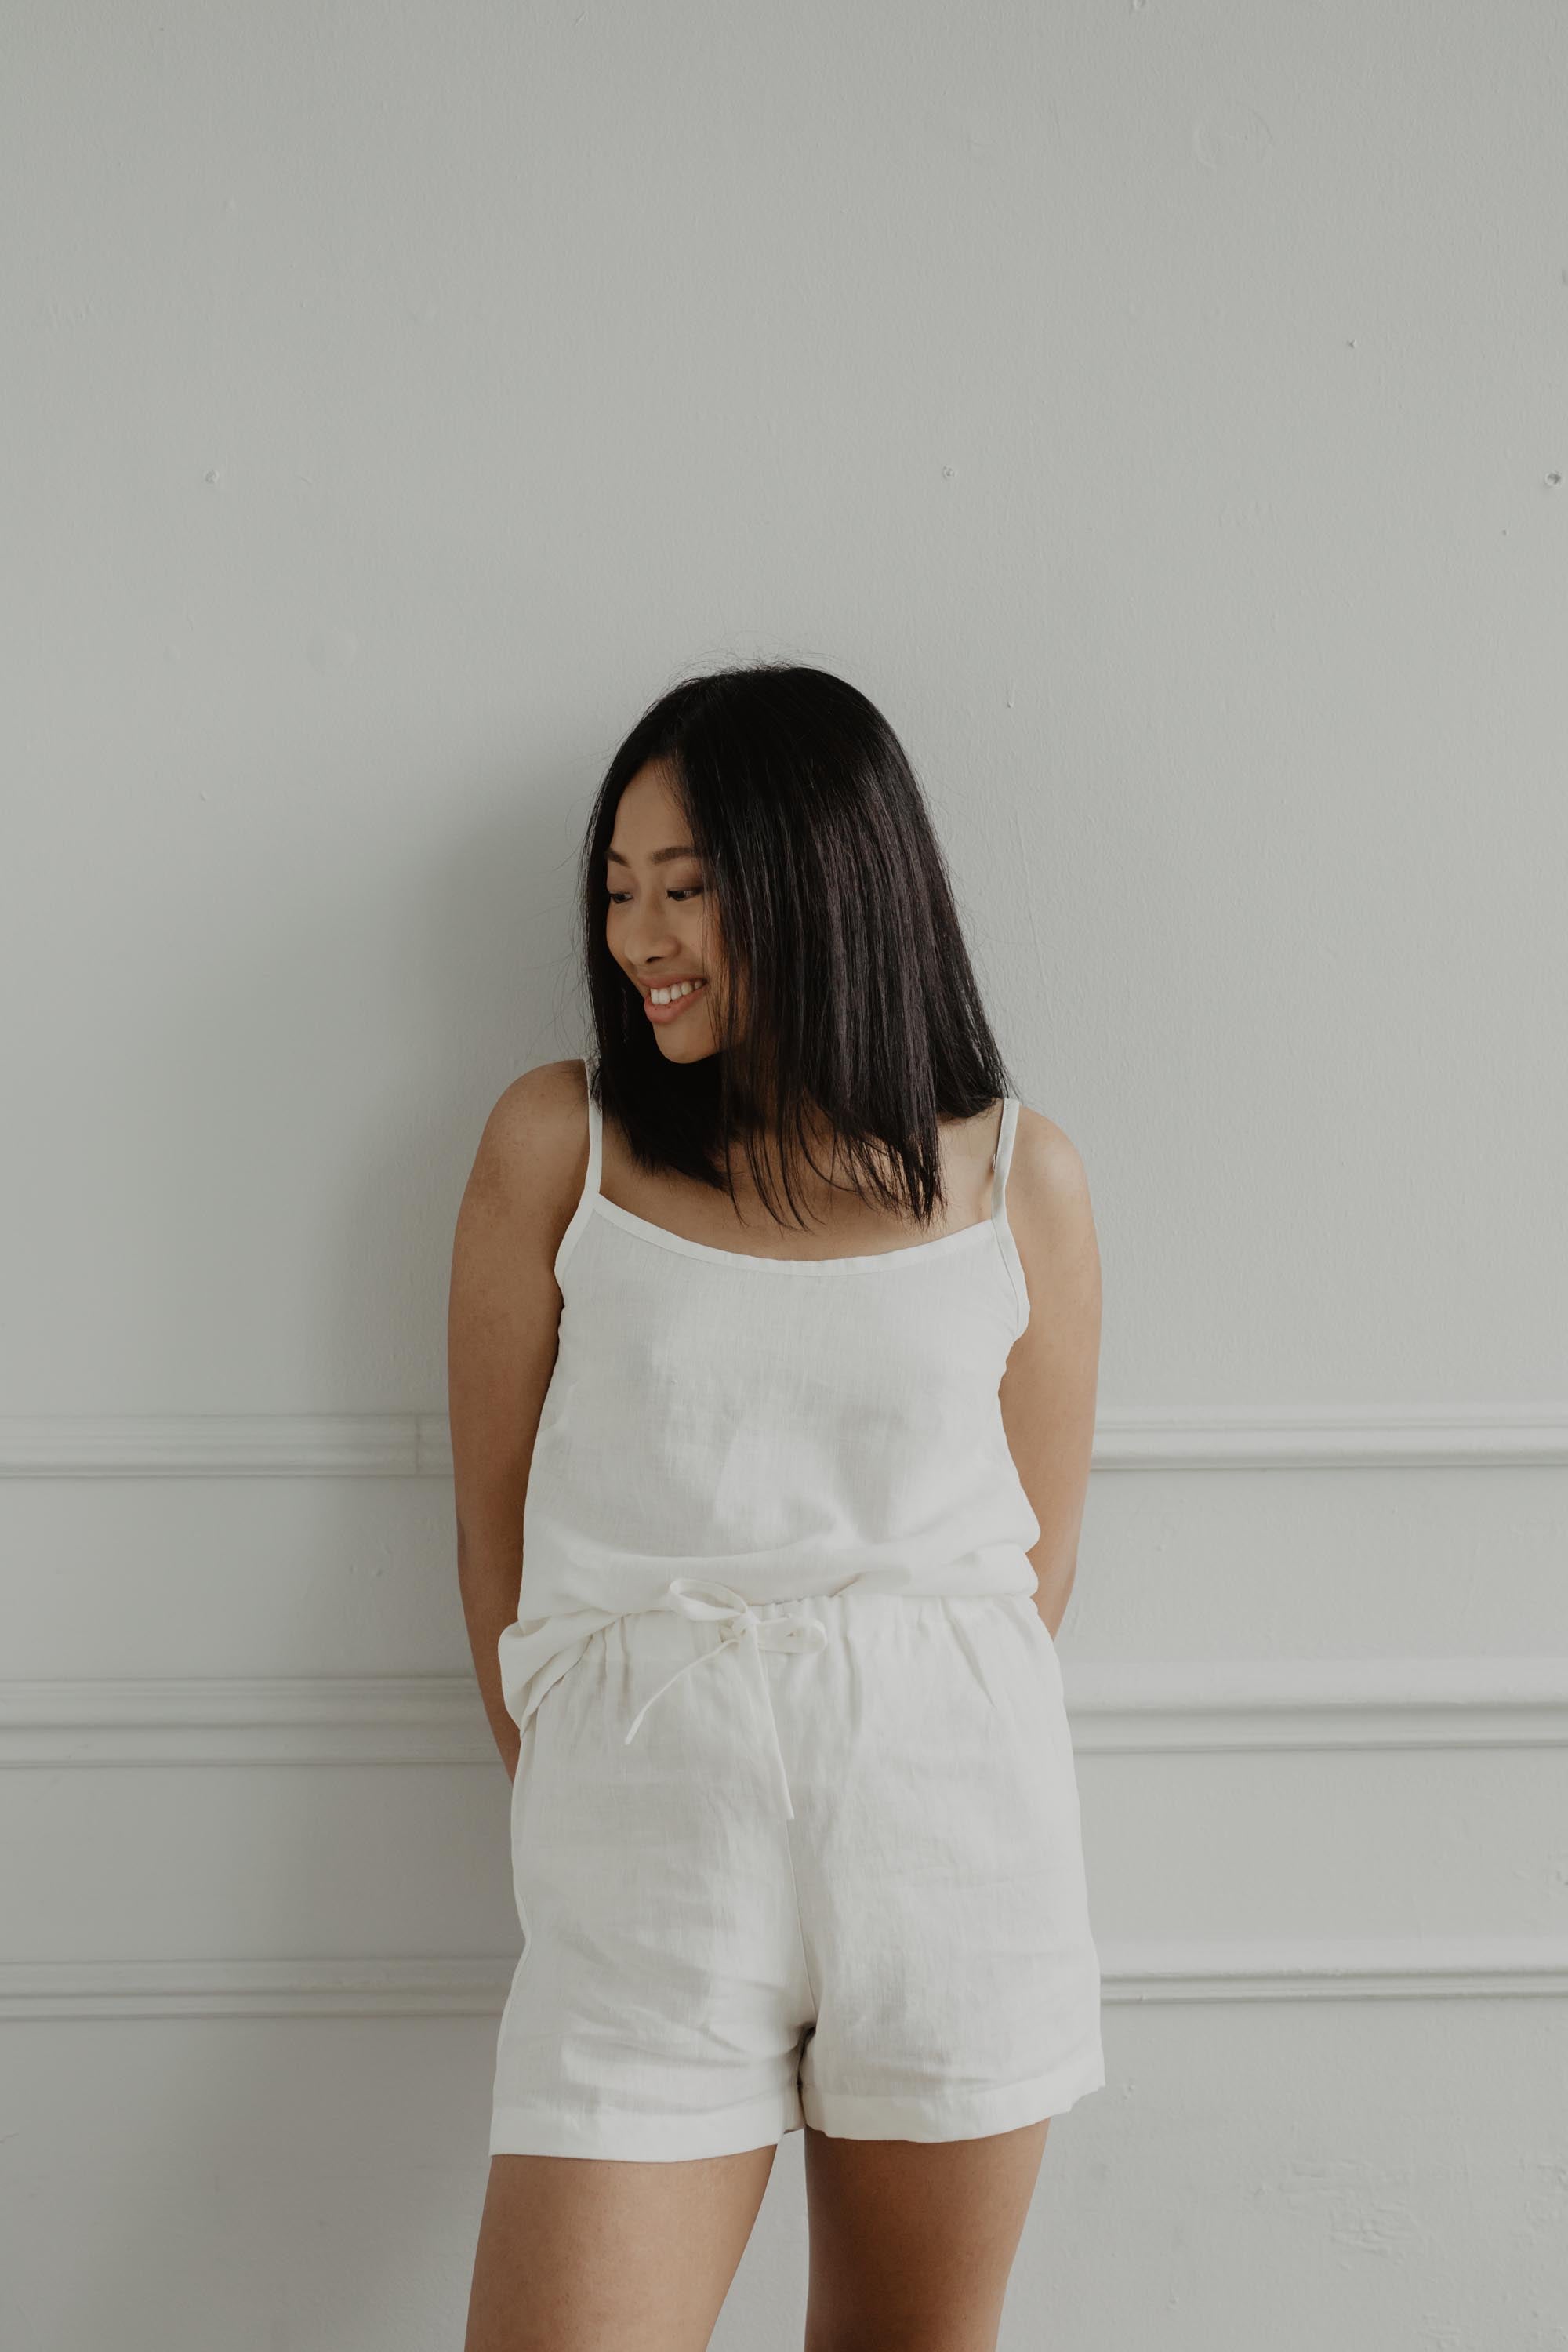 Woman Leaning On Wall Wearing A White Linen Sleeveless Pajama Set By AmourLinen